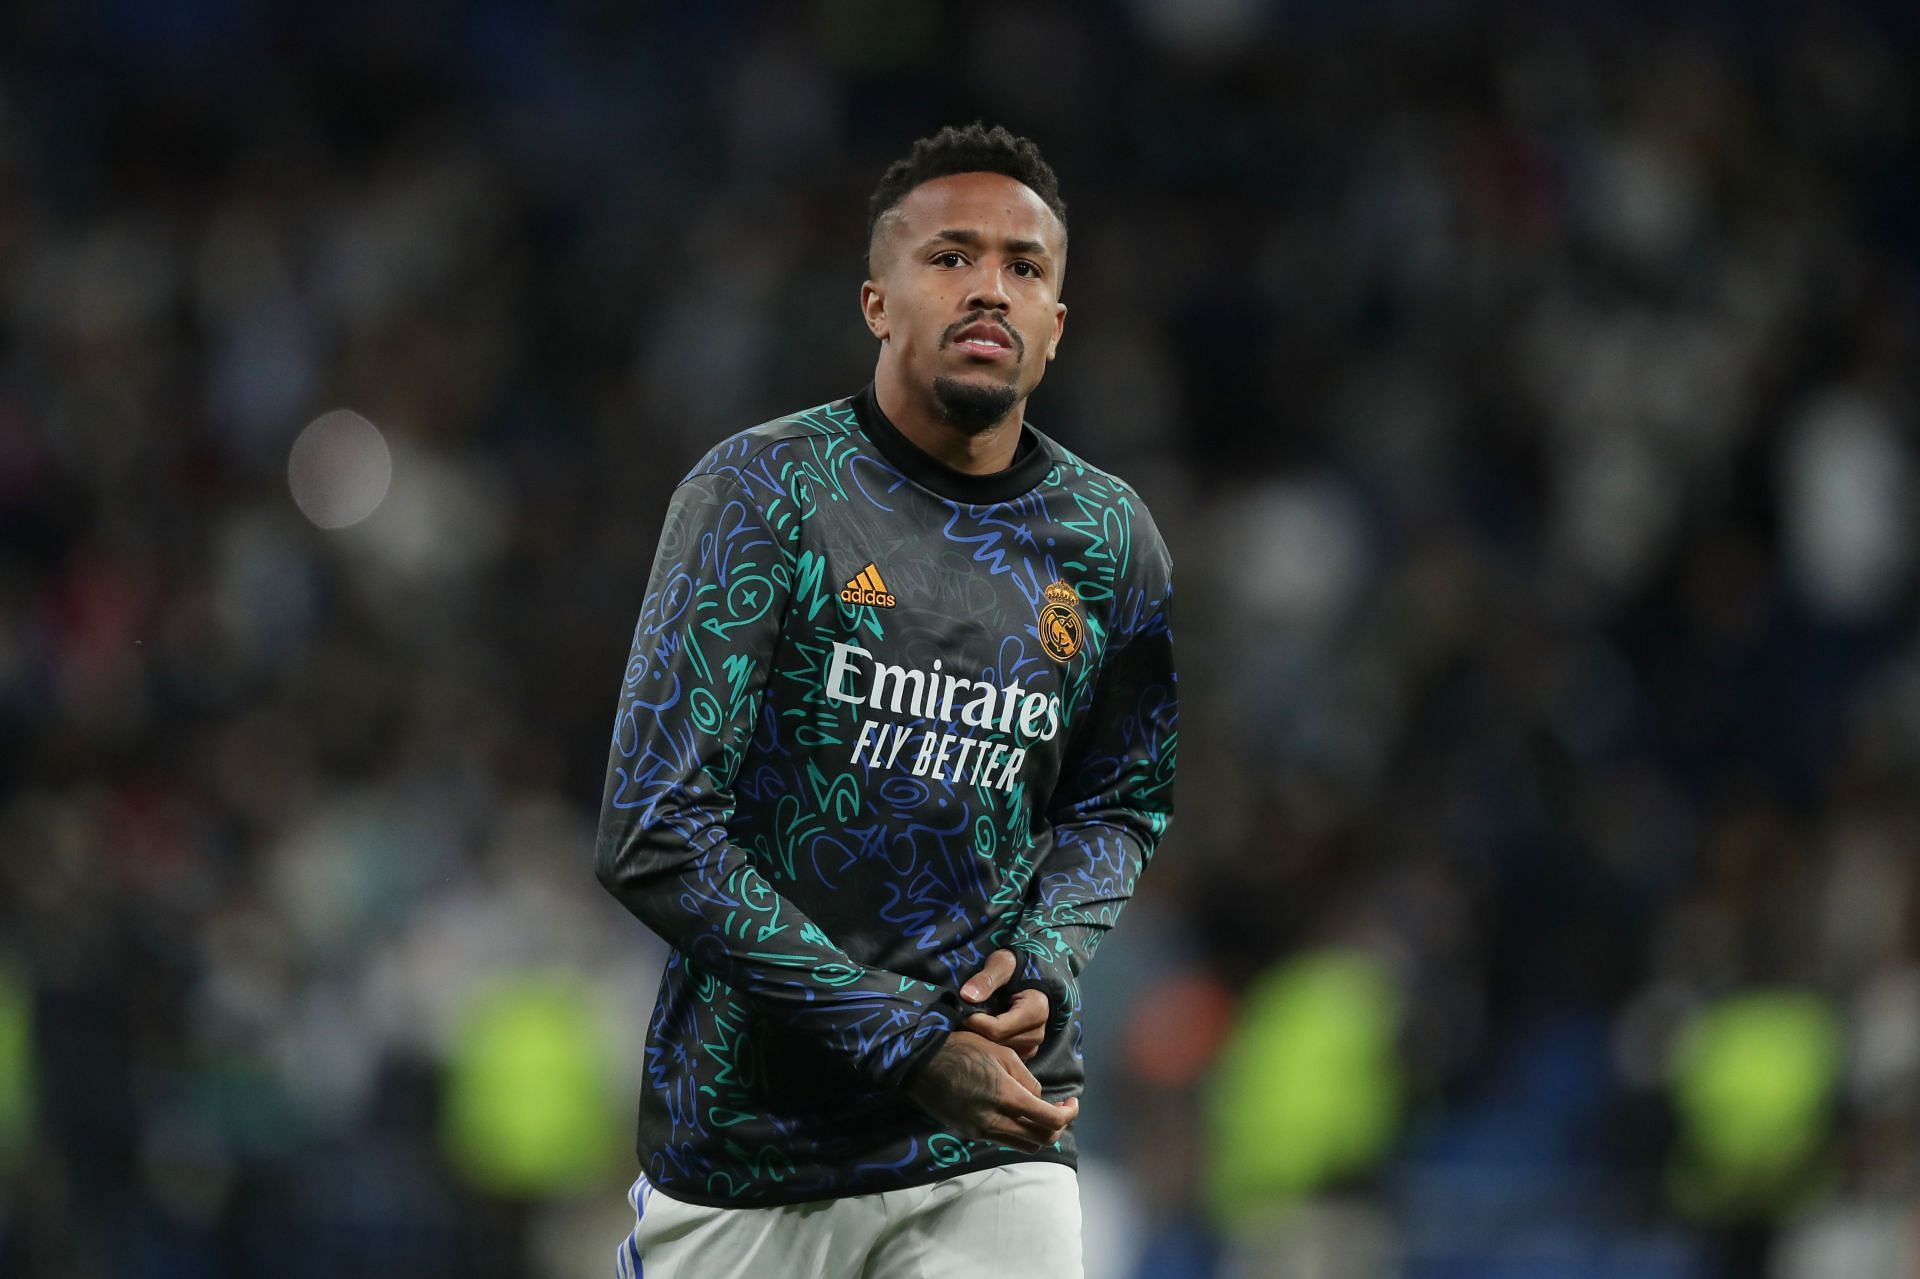 Eder Militao has been an assured presence at the back for Carlo Ancelotti this season.